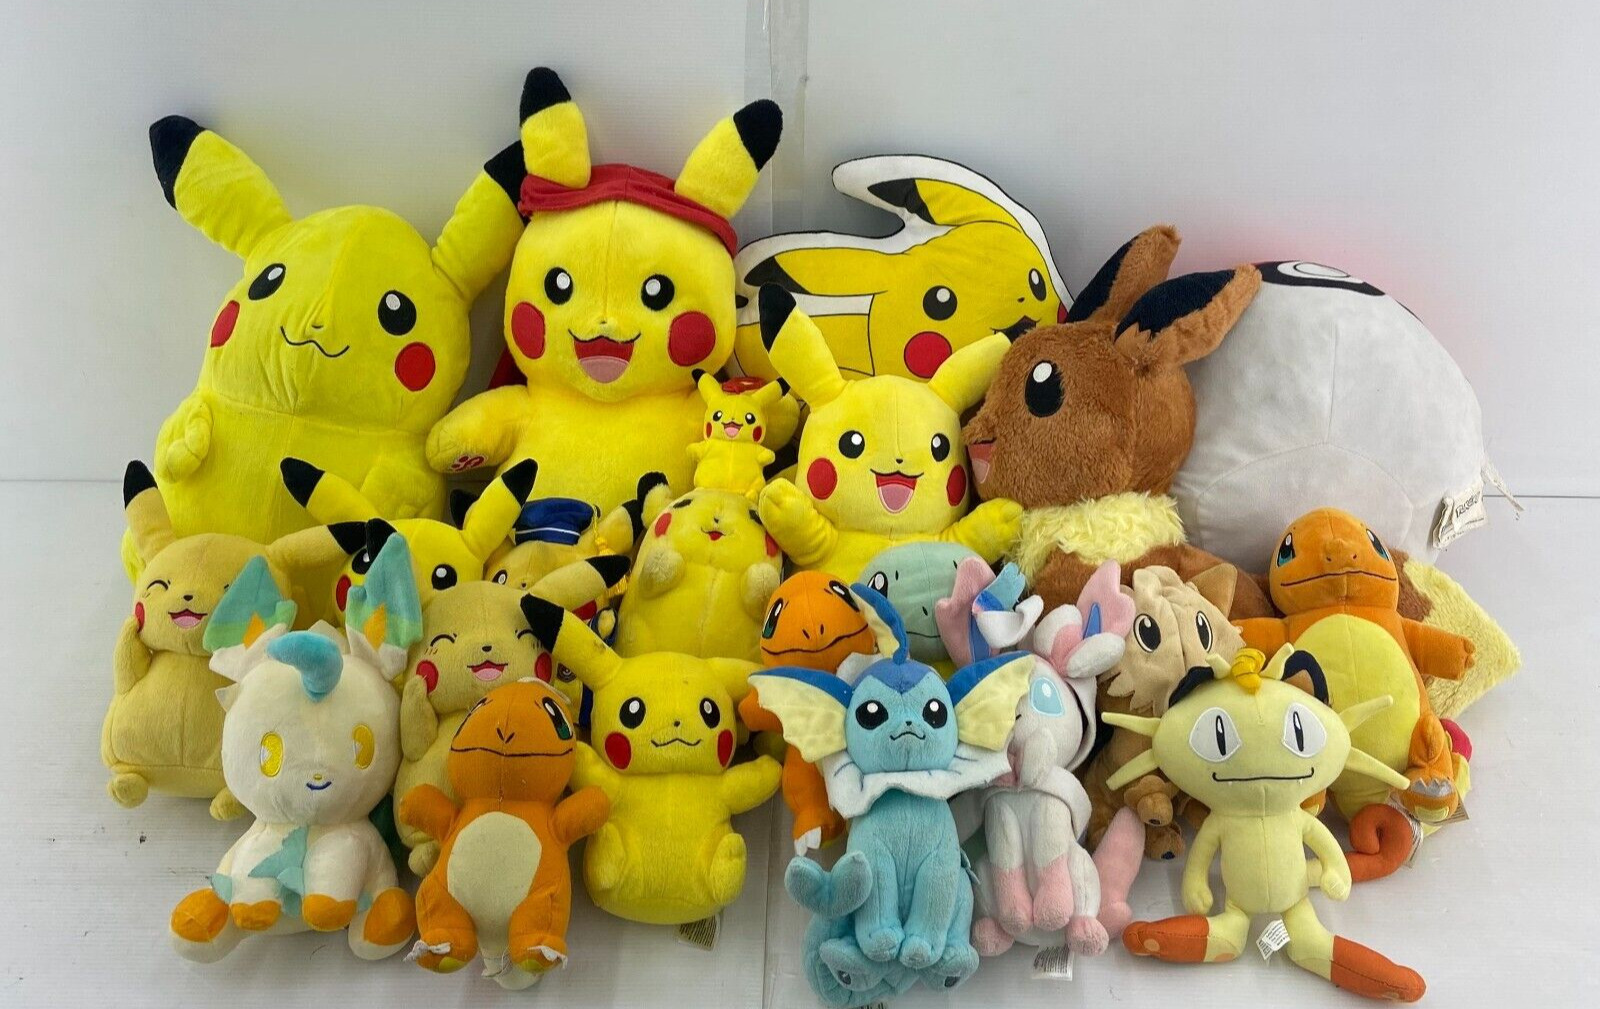 LOT of 22 Pokemon Plush Collectibles Toys Cute Pikachu Bulbasaur Squirtle Dolls